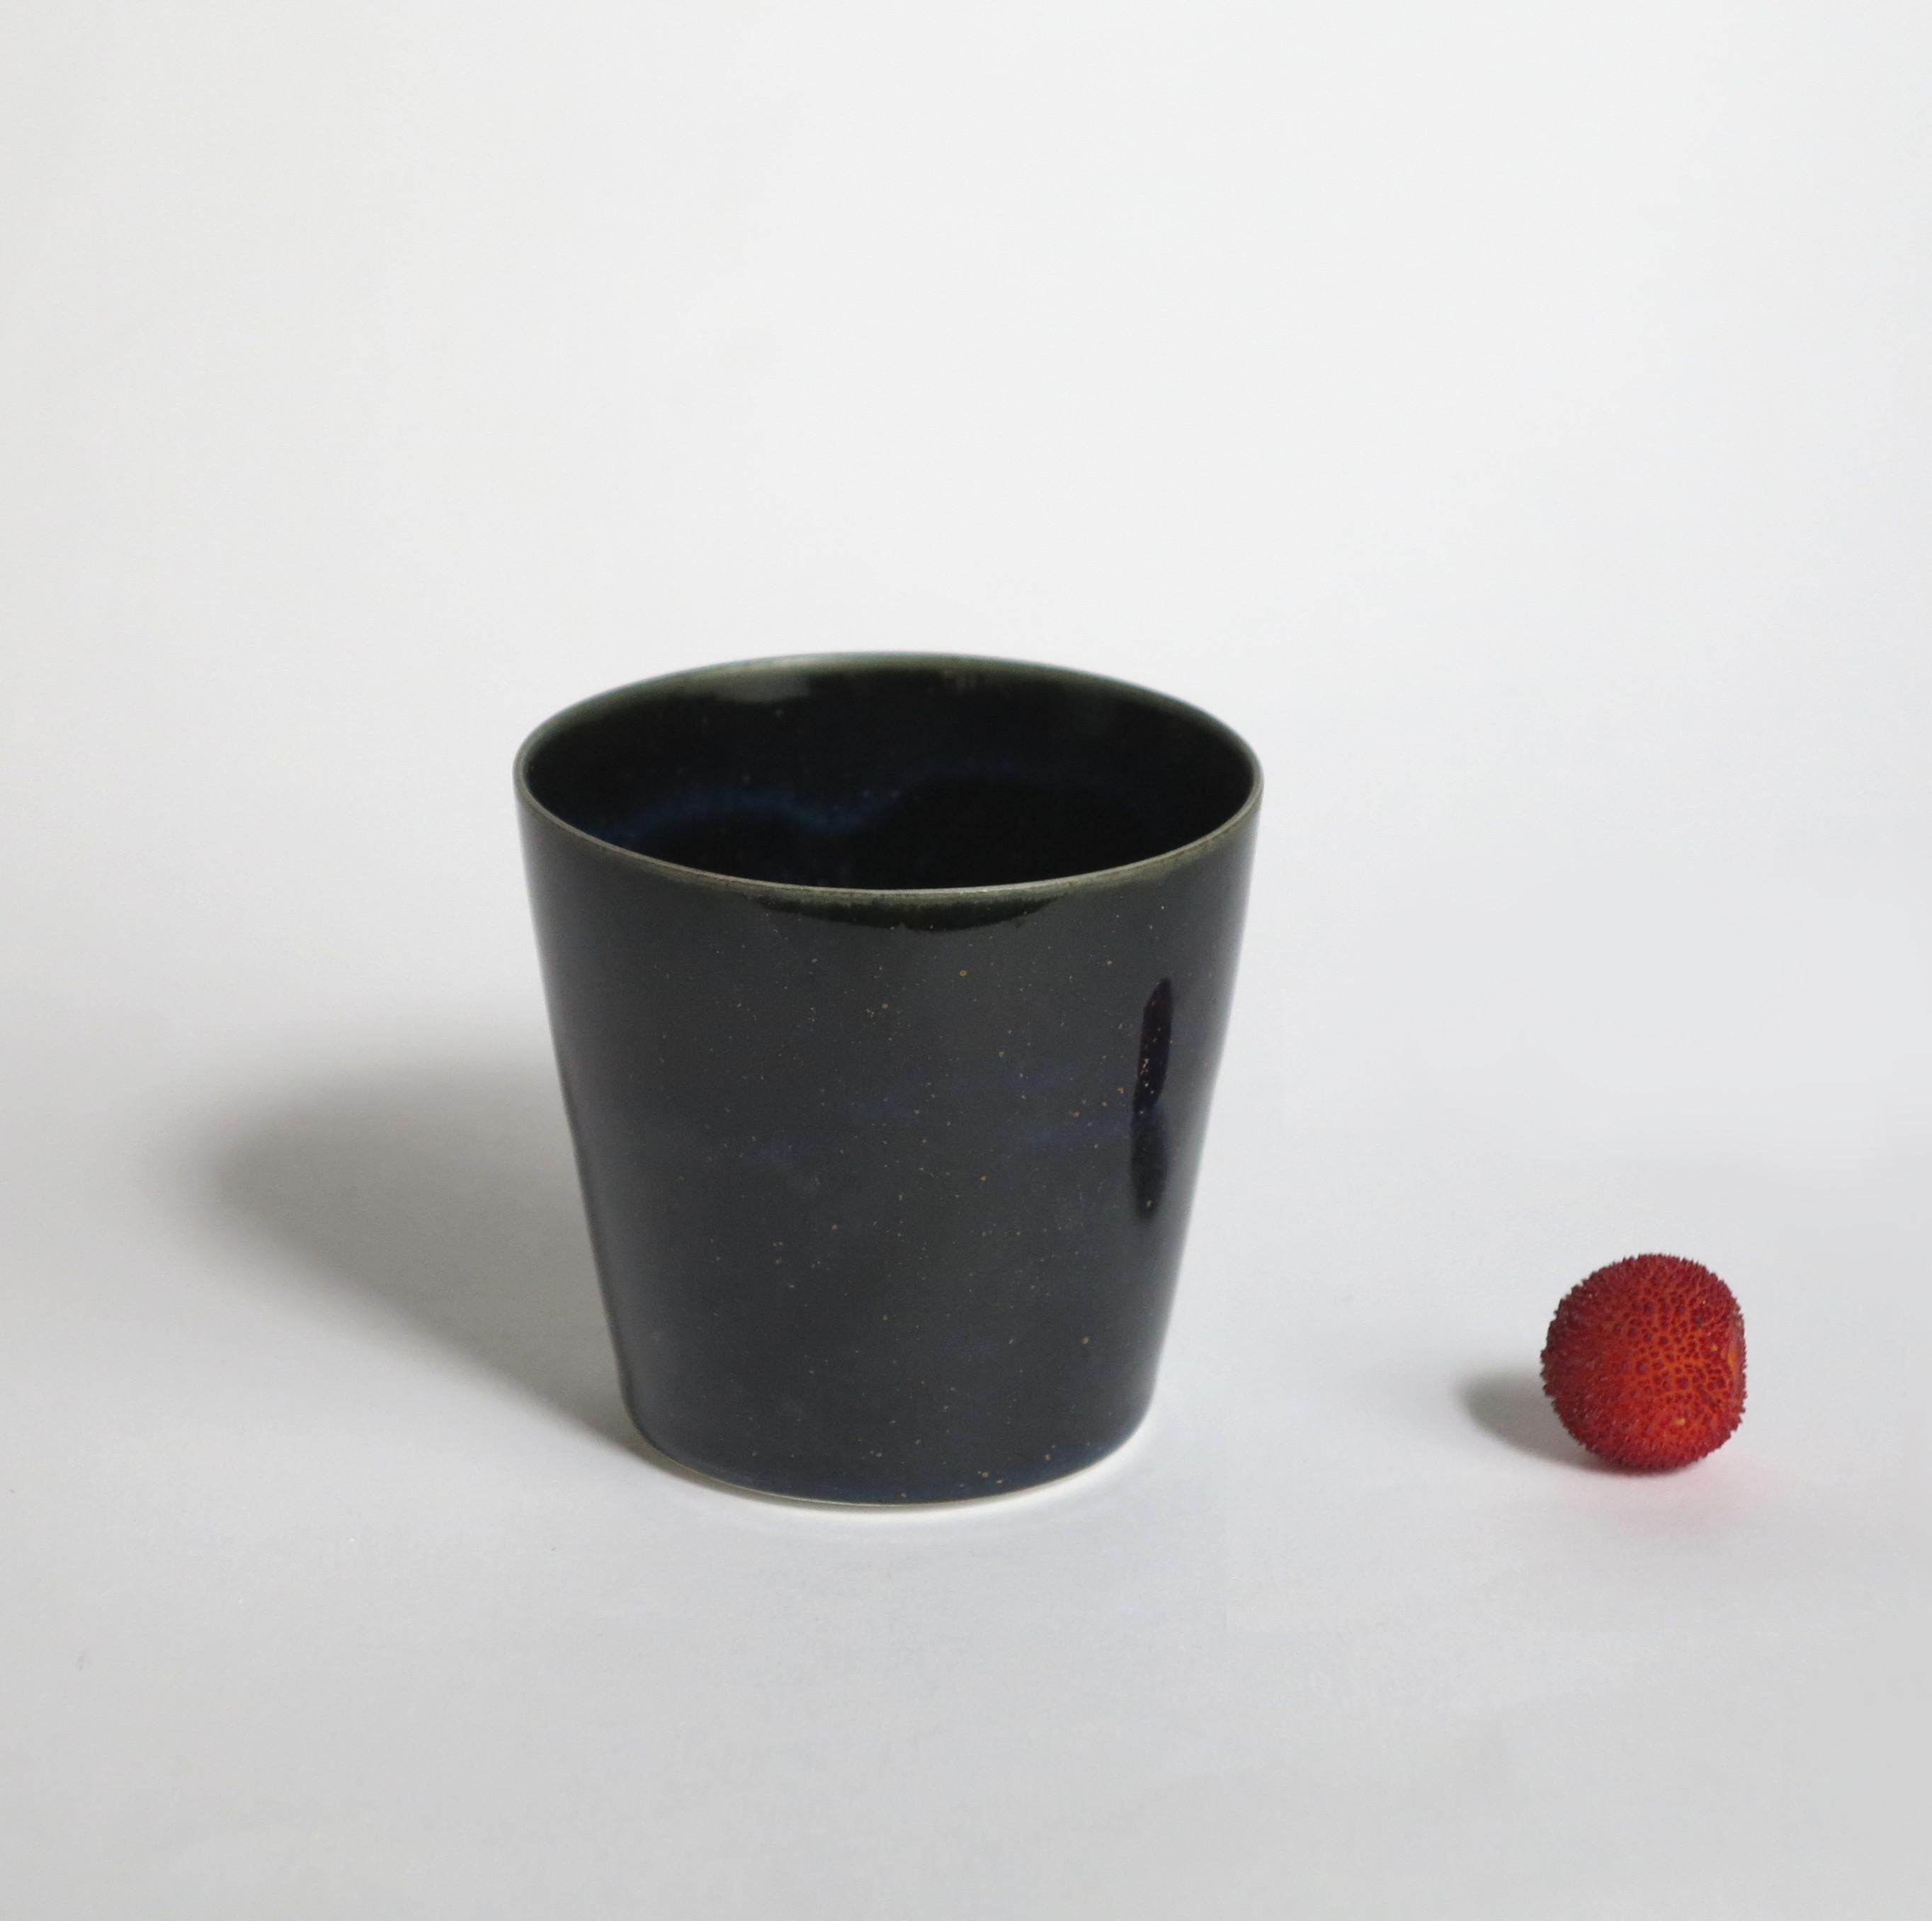 Set of 4 porcelain black coffee cups by Cica Gomez
Price for set of 4.
Dimensions: Ø 6.5 x H 6 cm
Materials: Porcelain

Usual objects. My work is first driven by the search for the line. The one that it draw when the object takes shape and